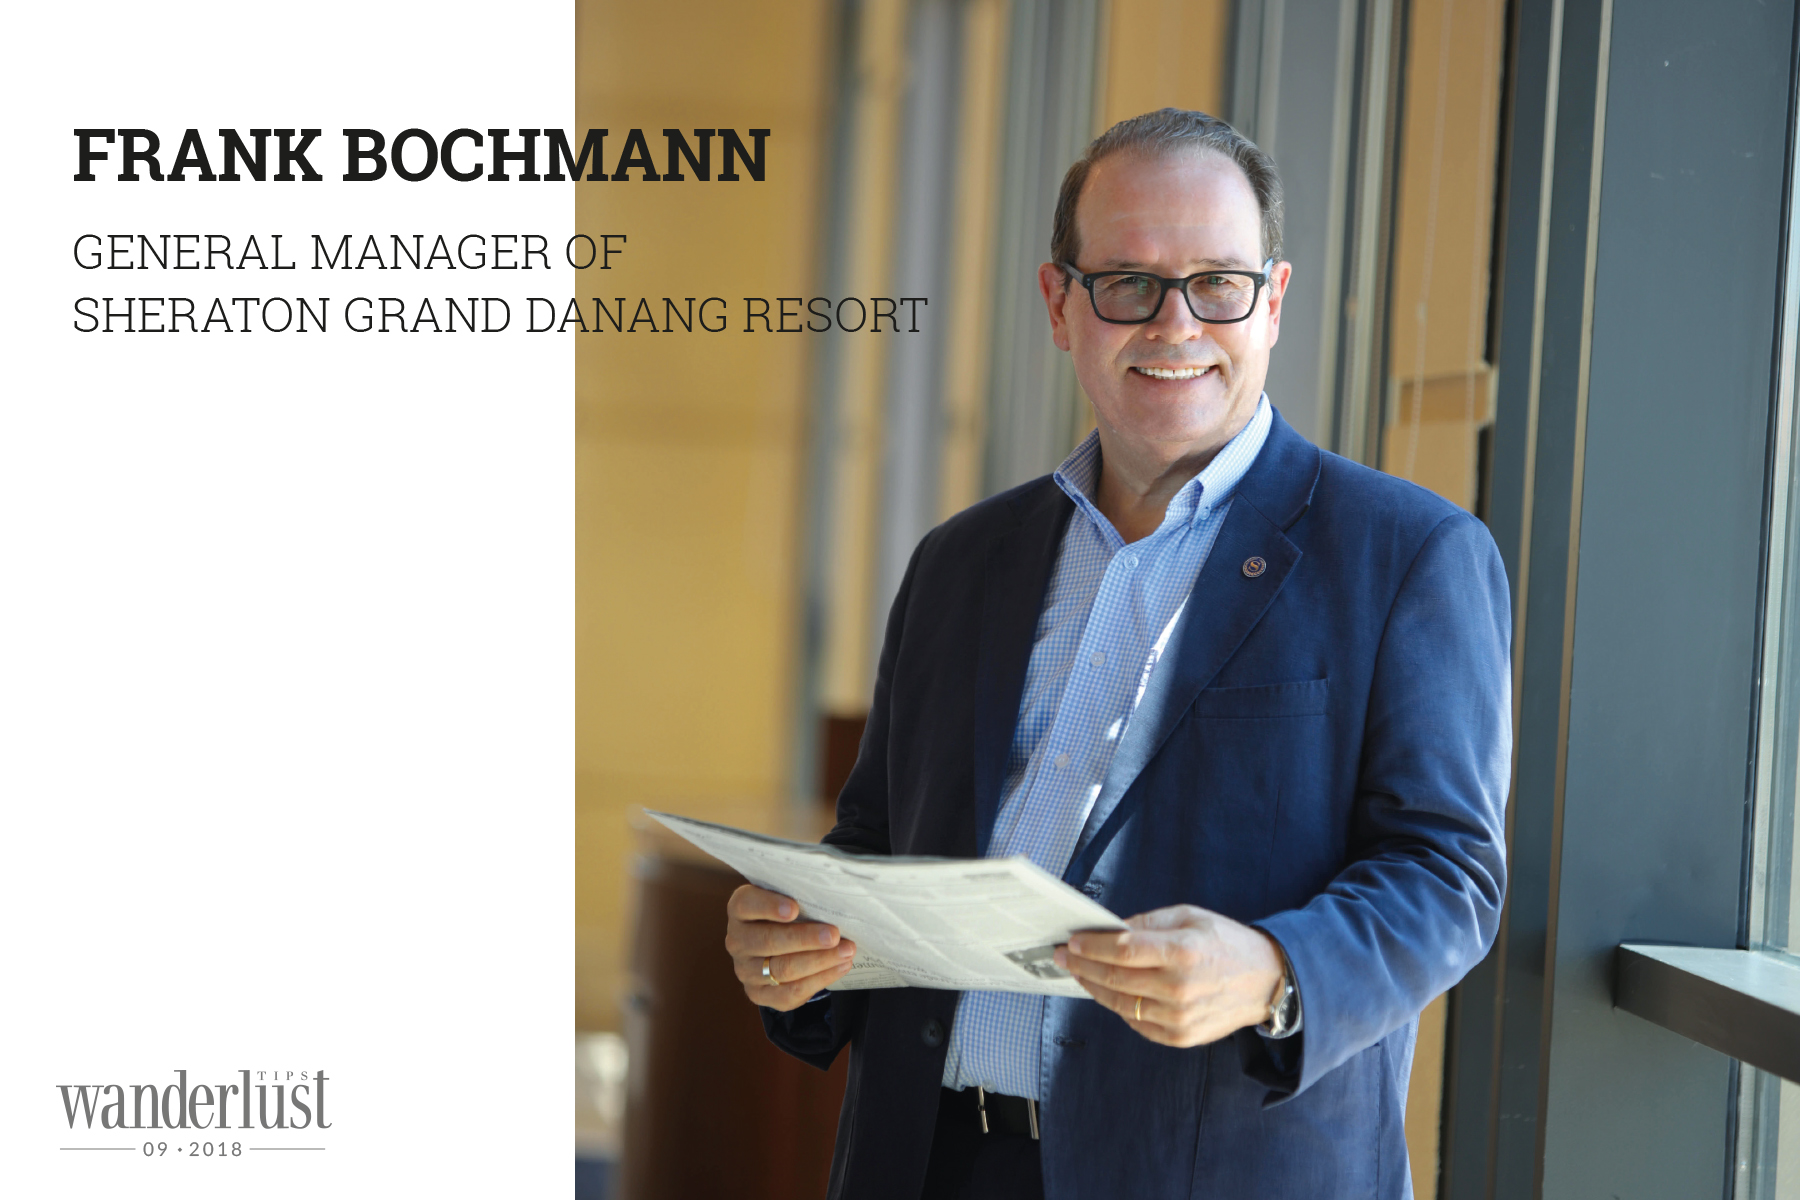 Wanderlust Tips Magazine | Interview with Frank Bochmann - General Manager of Sheraton Grand Danang Resort